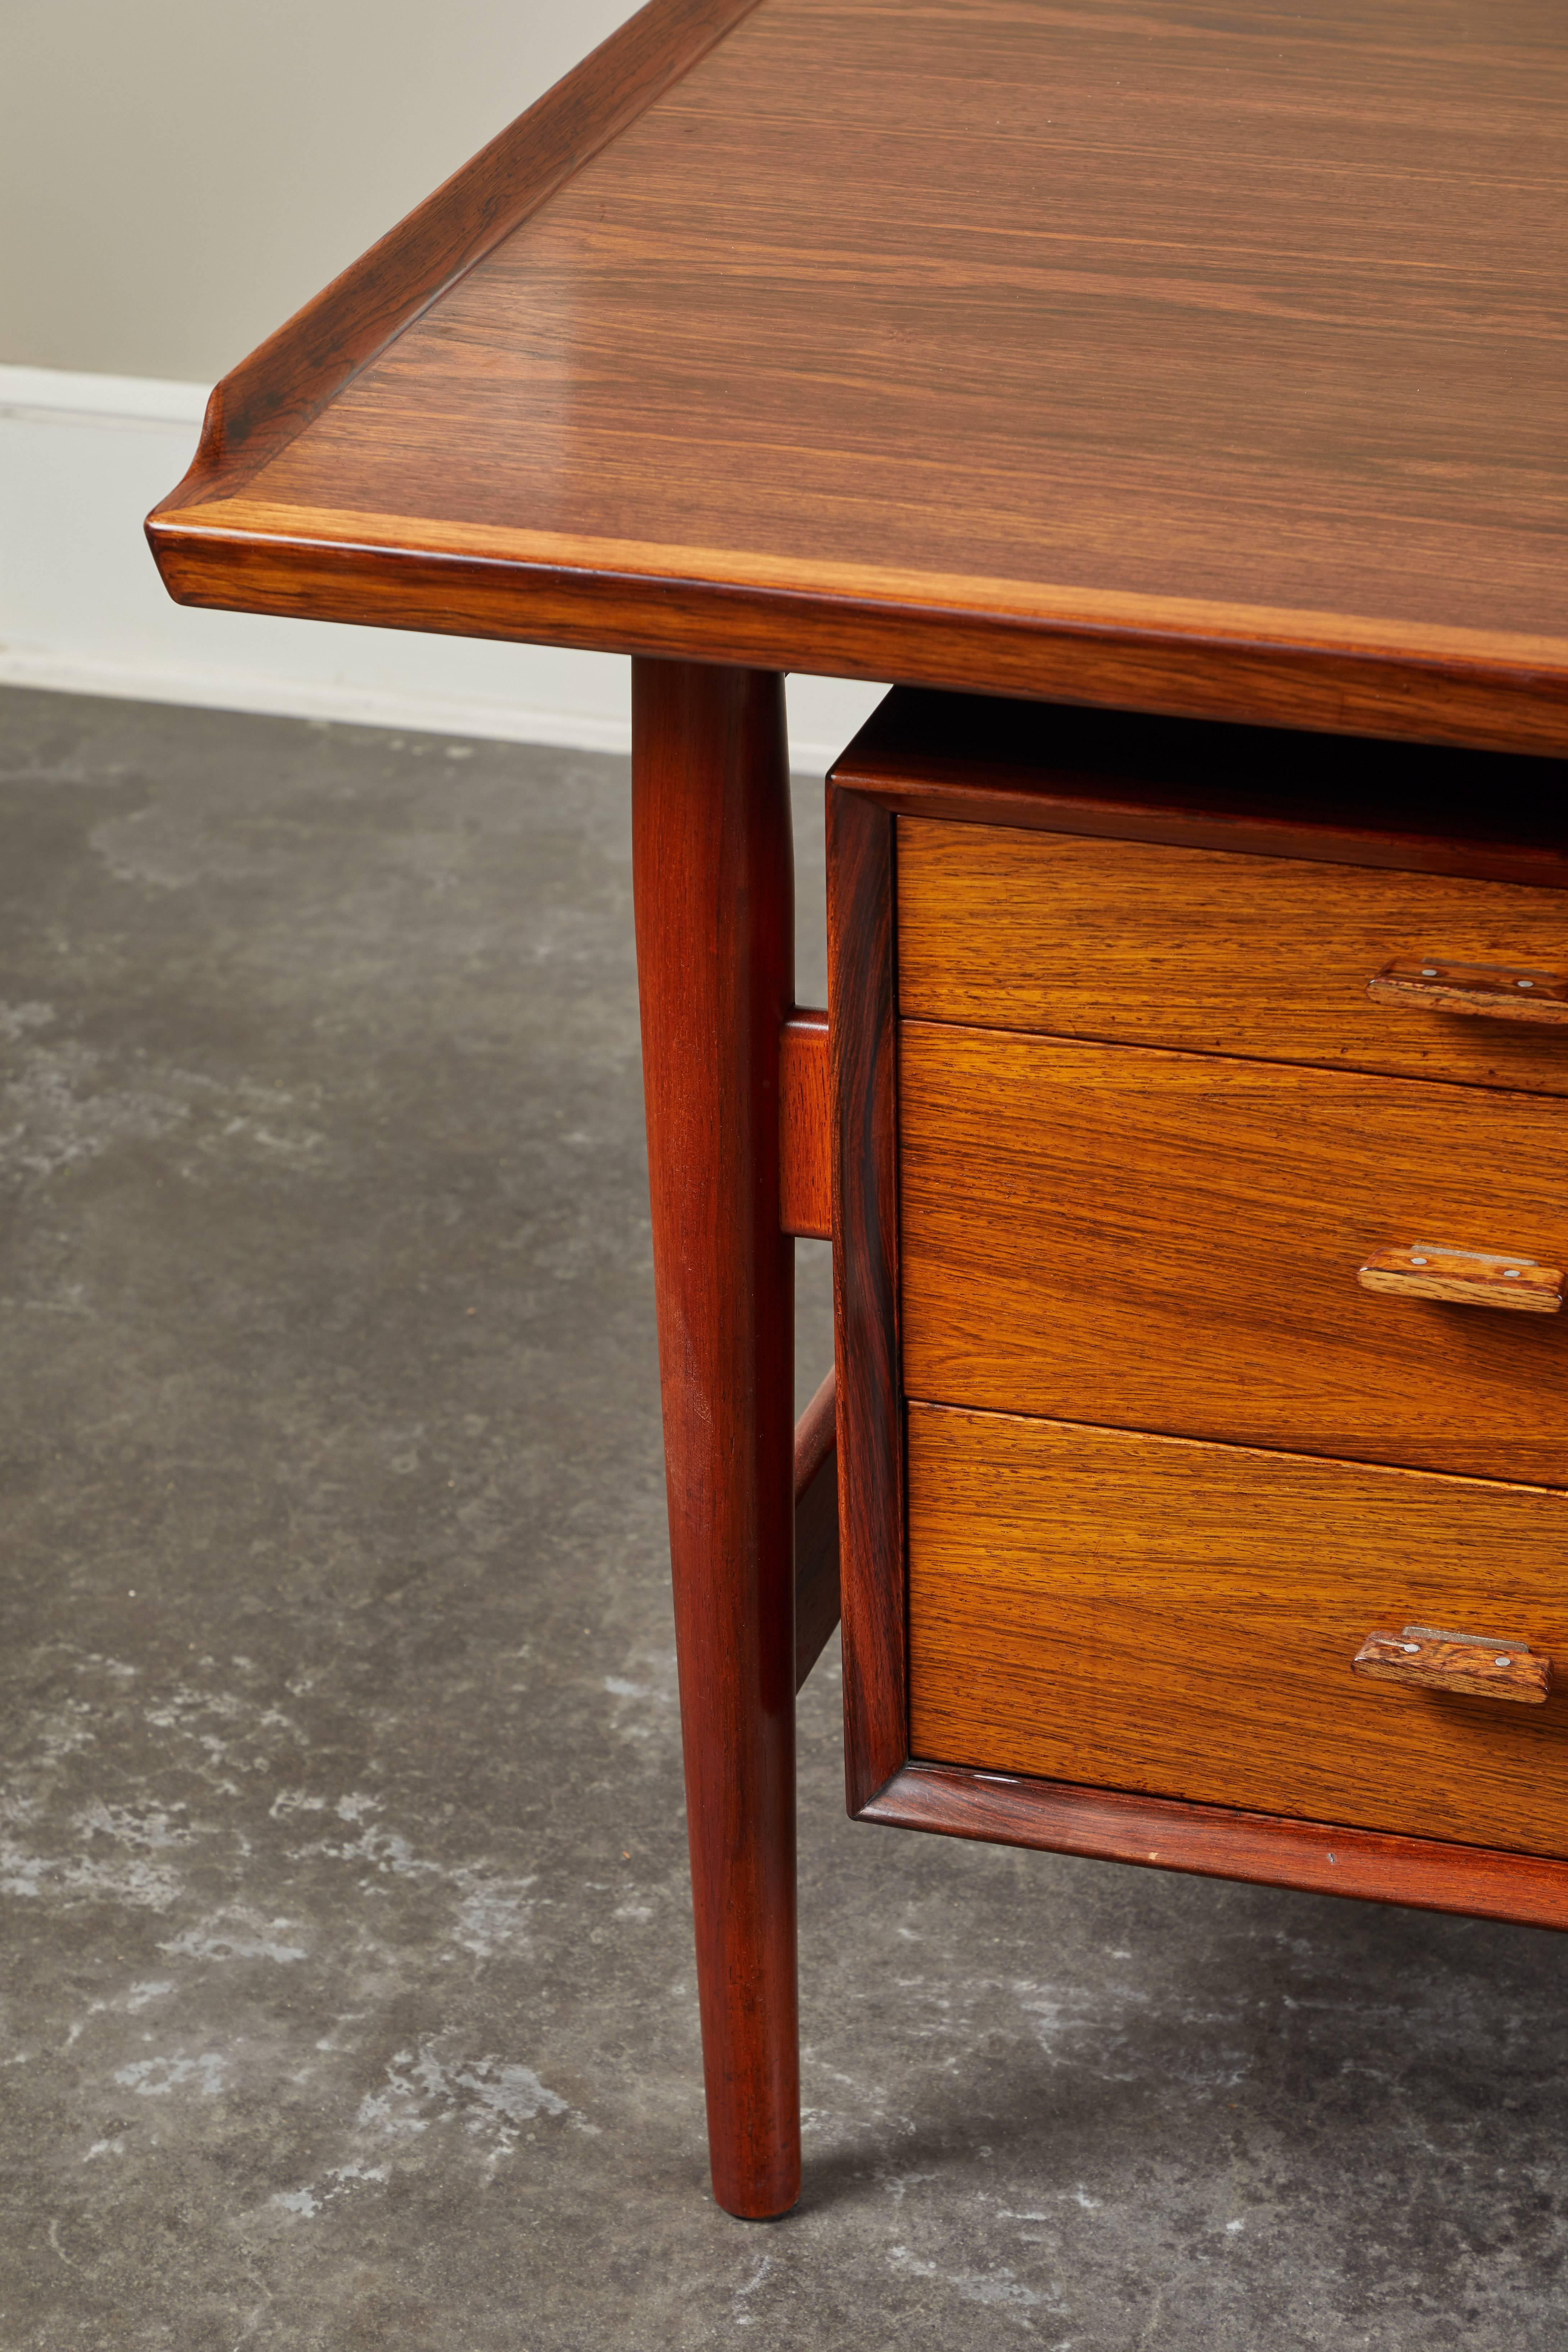 Danish Mid-Century Modern rosewood desk designed by Arne Vodder. Bold, executive style from every angle. Three drawers on the left, two on the right - the lower drawer is a file drawer.